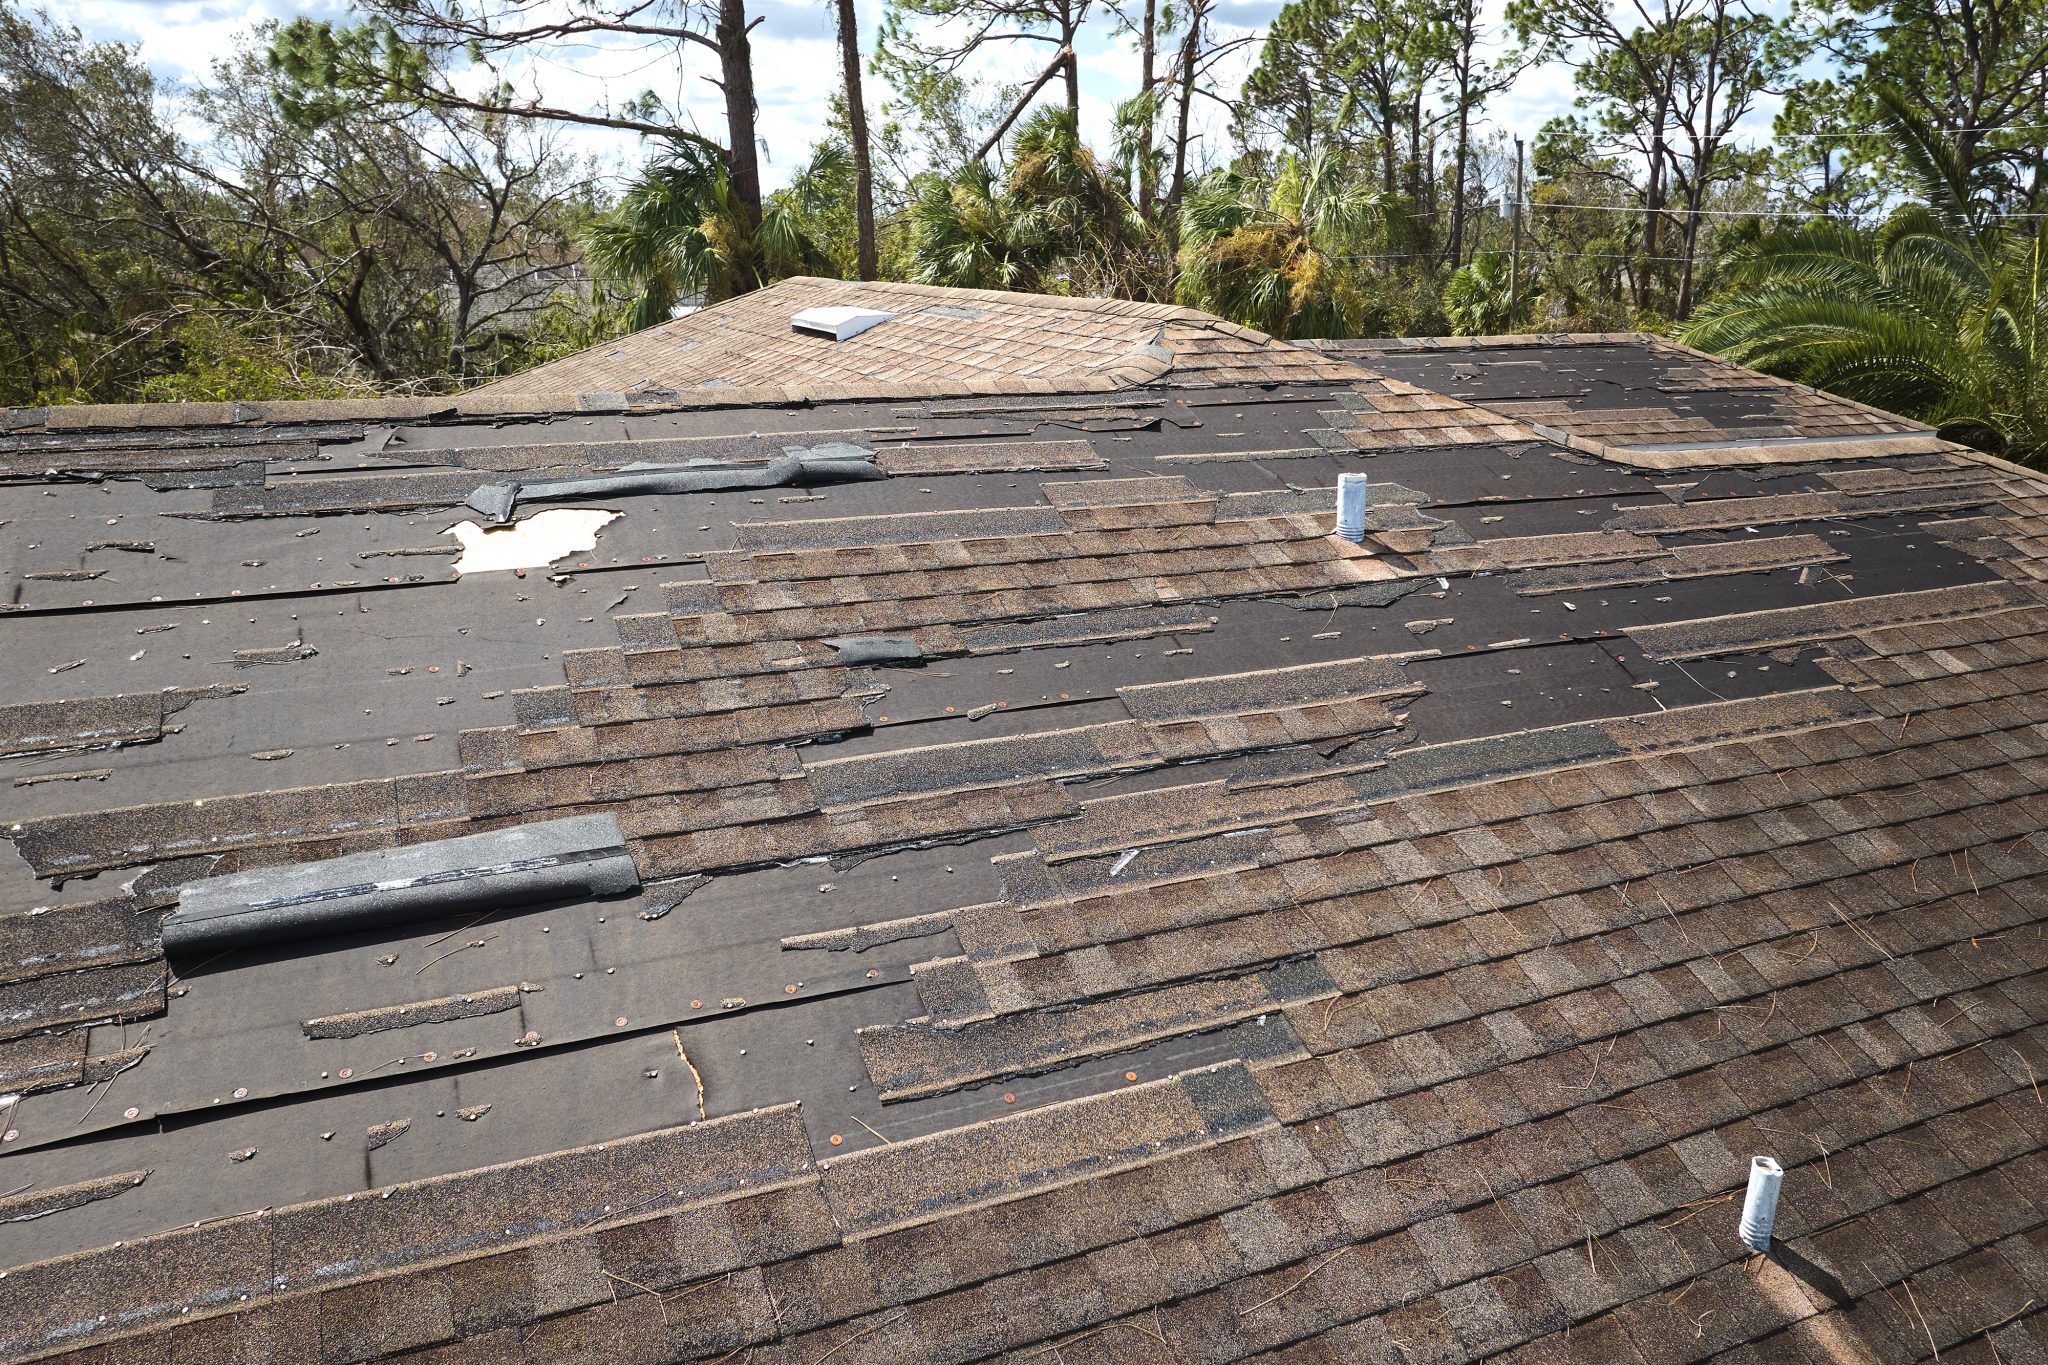 Damaged house roof with missing shingles after hurricane Ian in Florida. Consequences of natural disaster like storm